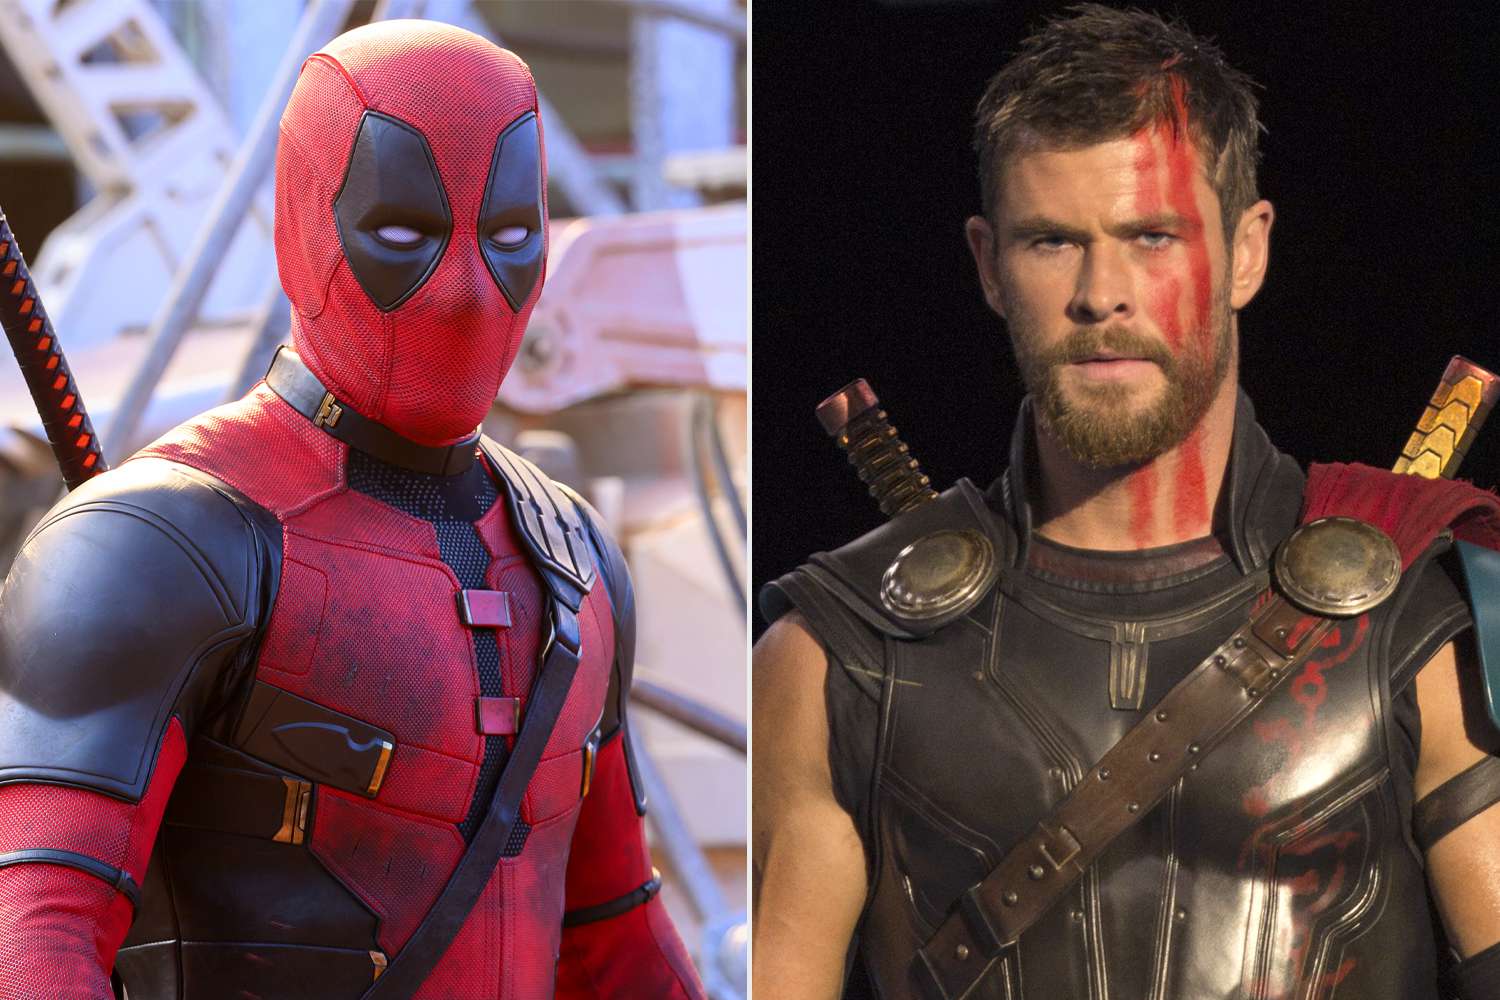 Chris Hemsworth and Ryan Reynolds Tease That They Know More About Marvel's Future: 'I Can Keep Secrets'